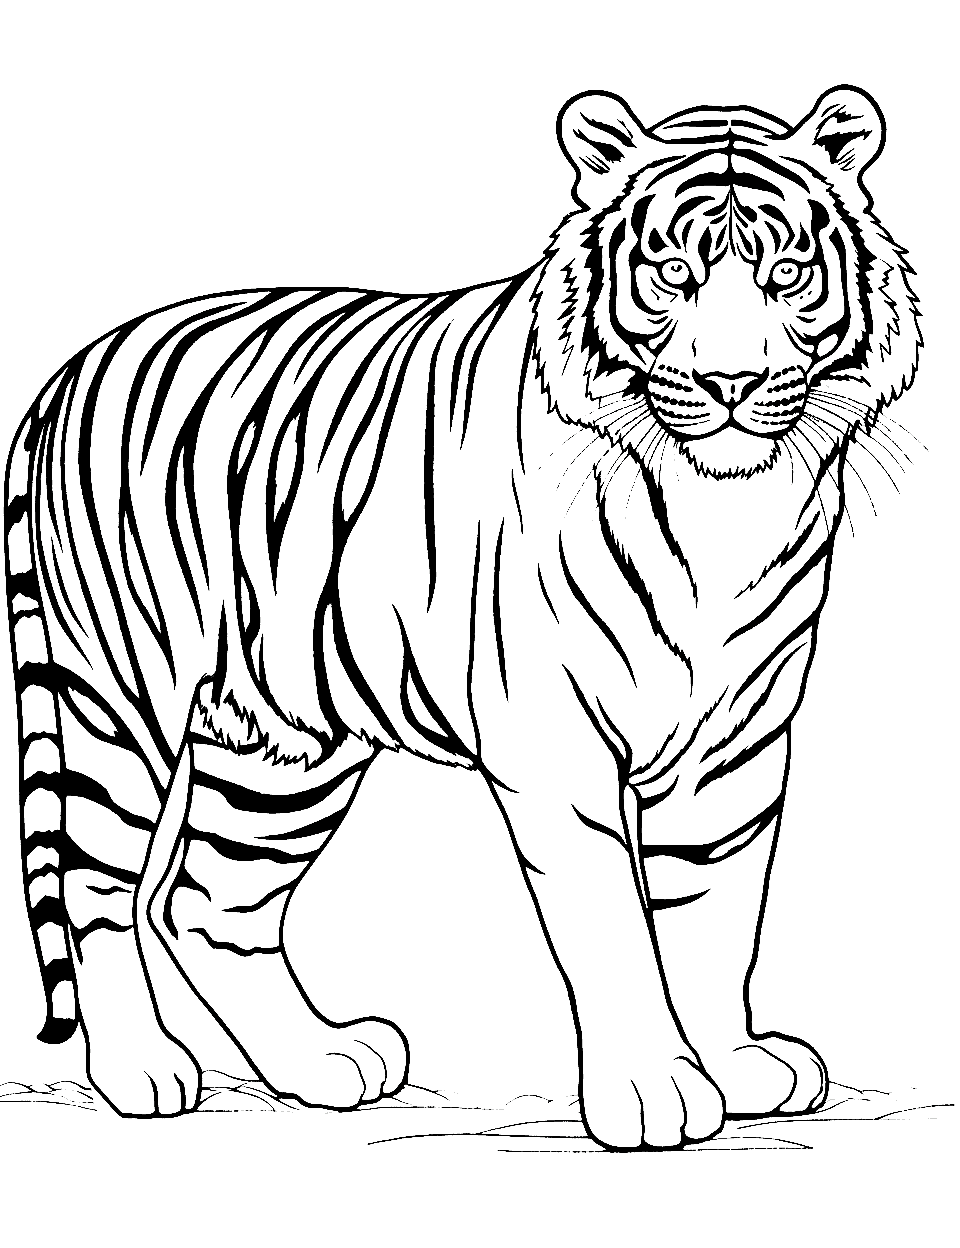 Extinct Caspian Beauty Tiger Coloring Page - The Caspian tiger showcasing its once-majestic beauty.